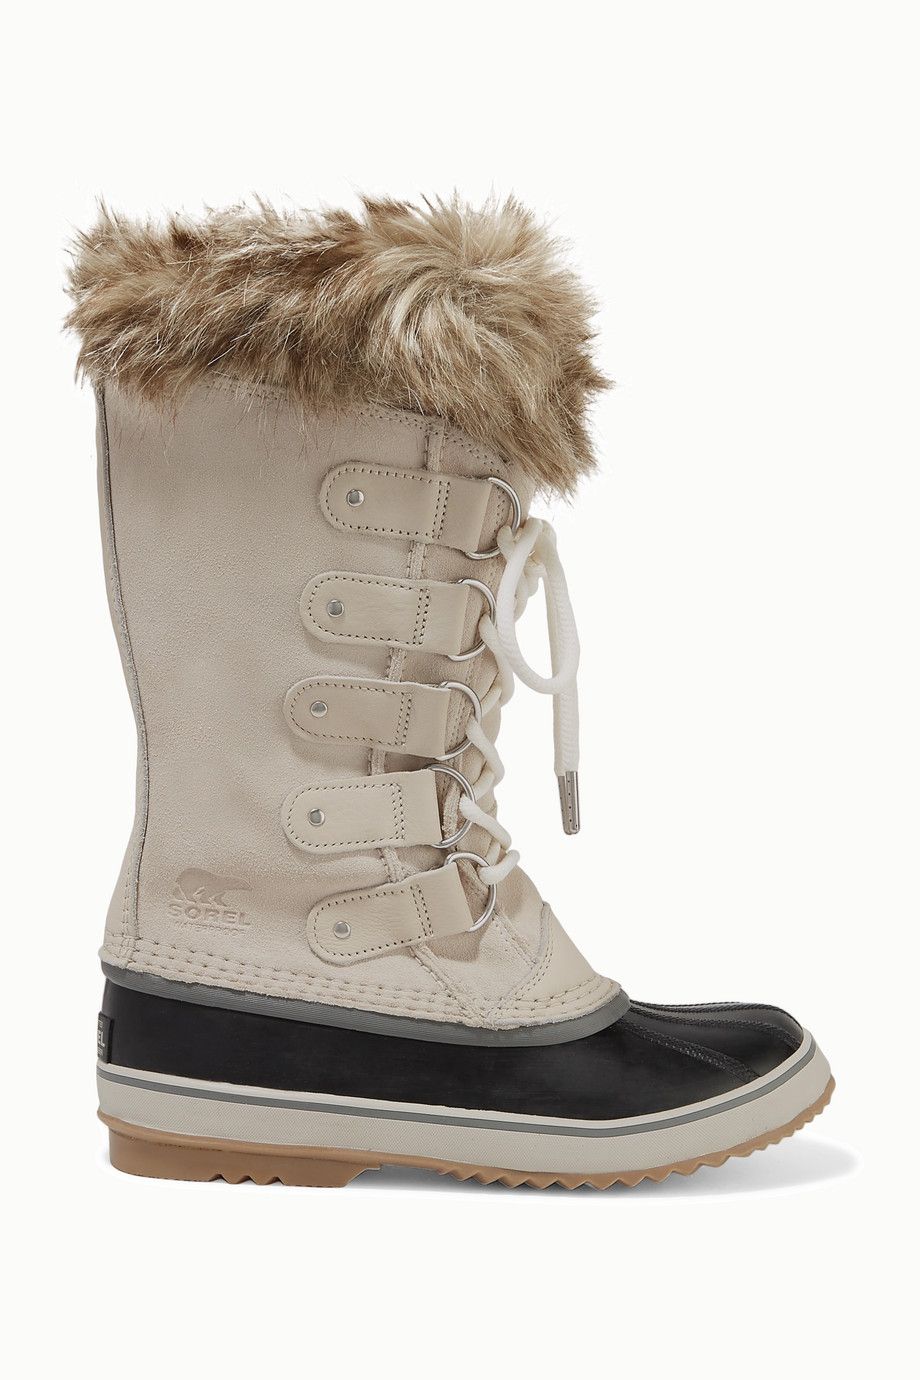 stylish boots for winter